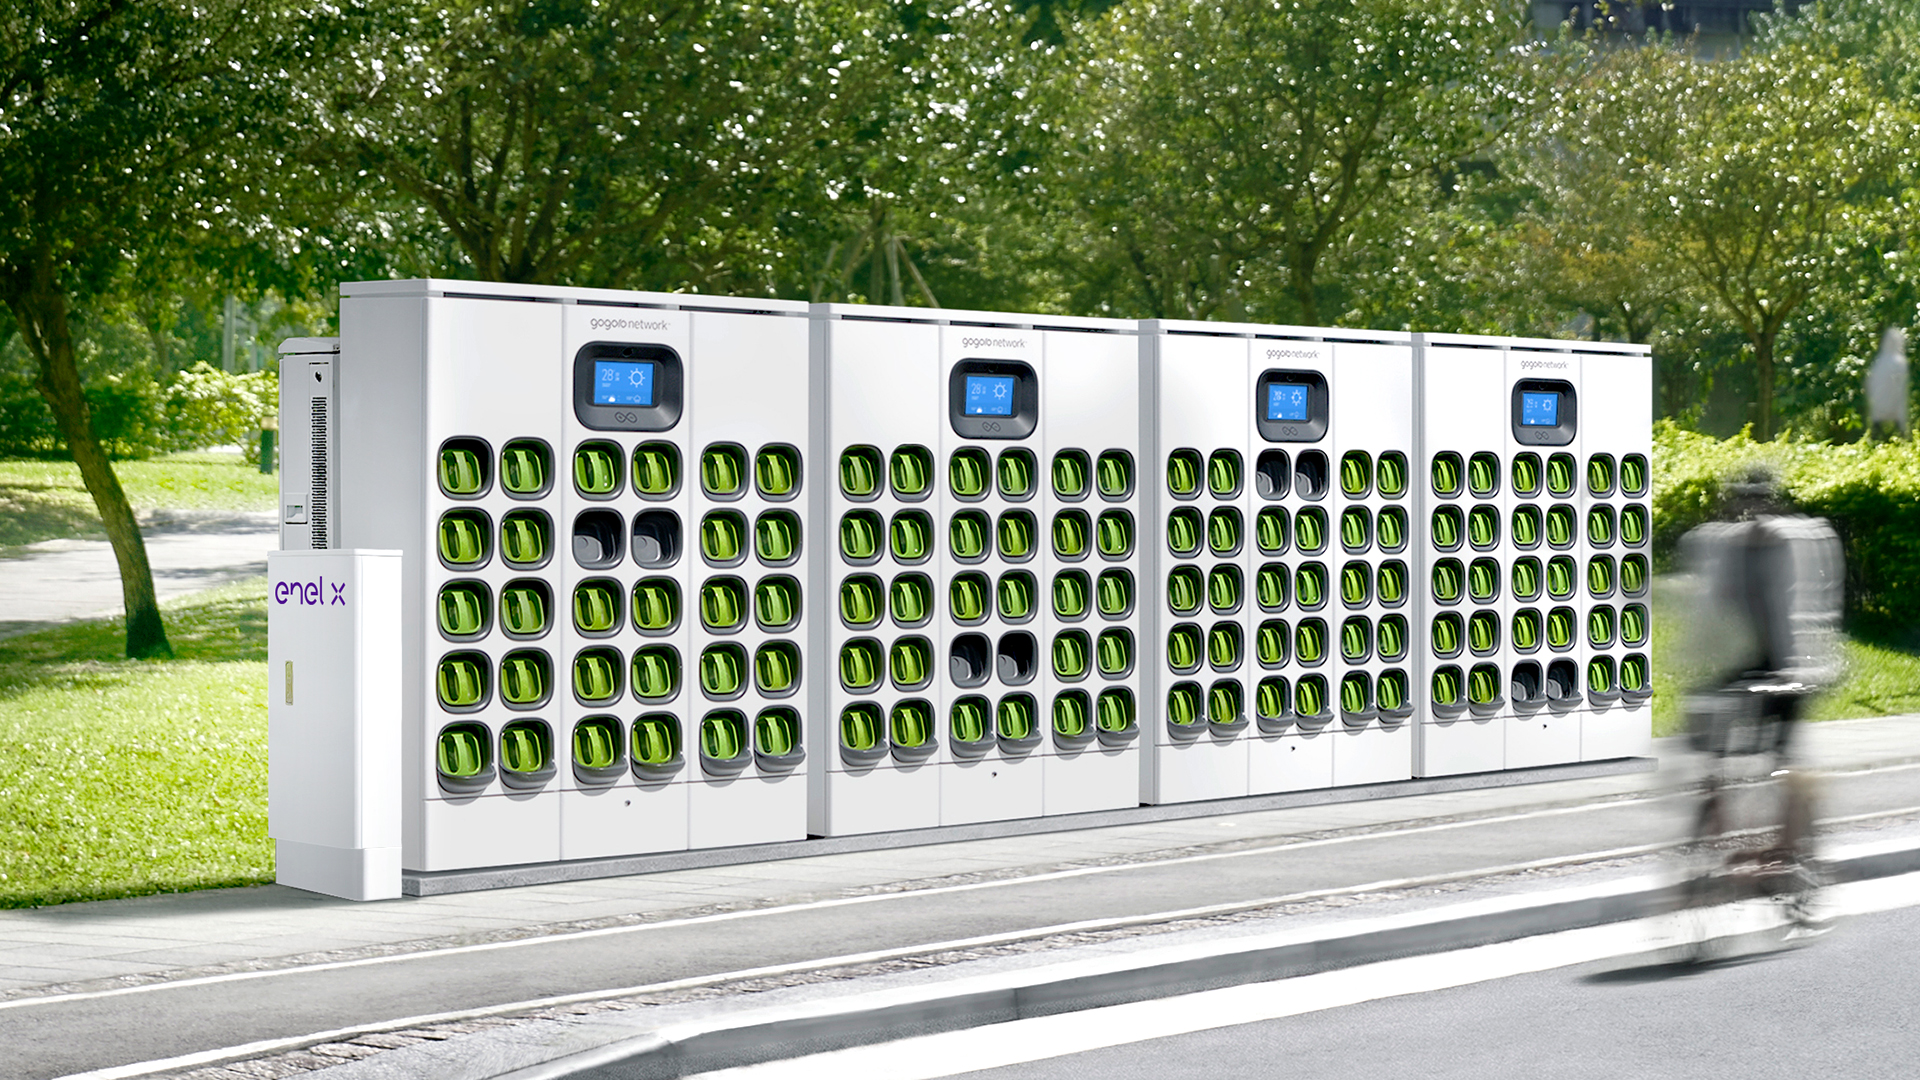 On the side of a road stands a gogoro power station with an enel x system box on the side. Each of the four network station units holds 30 batteries.